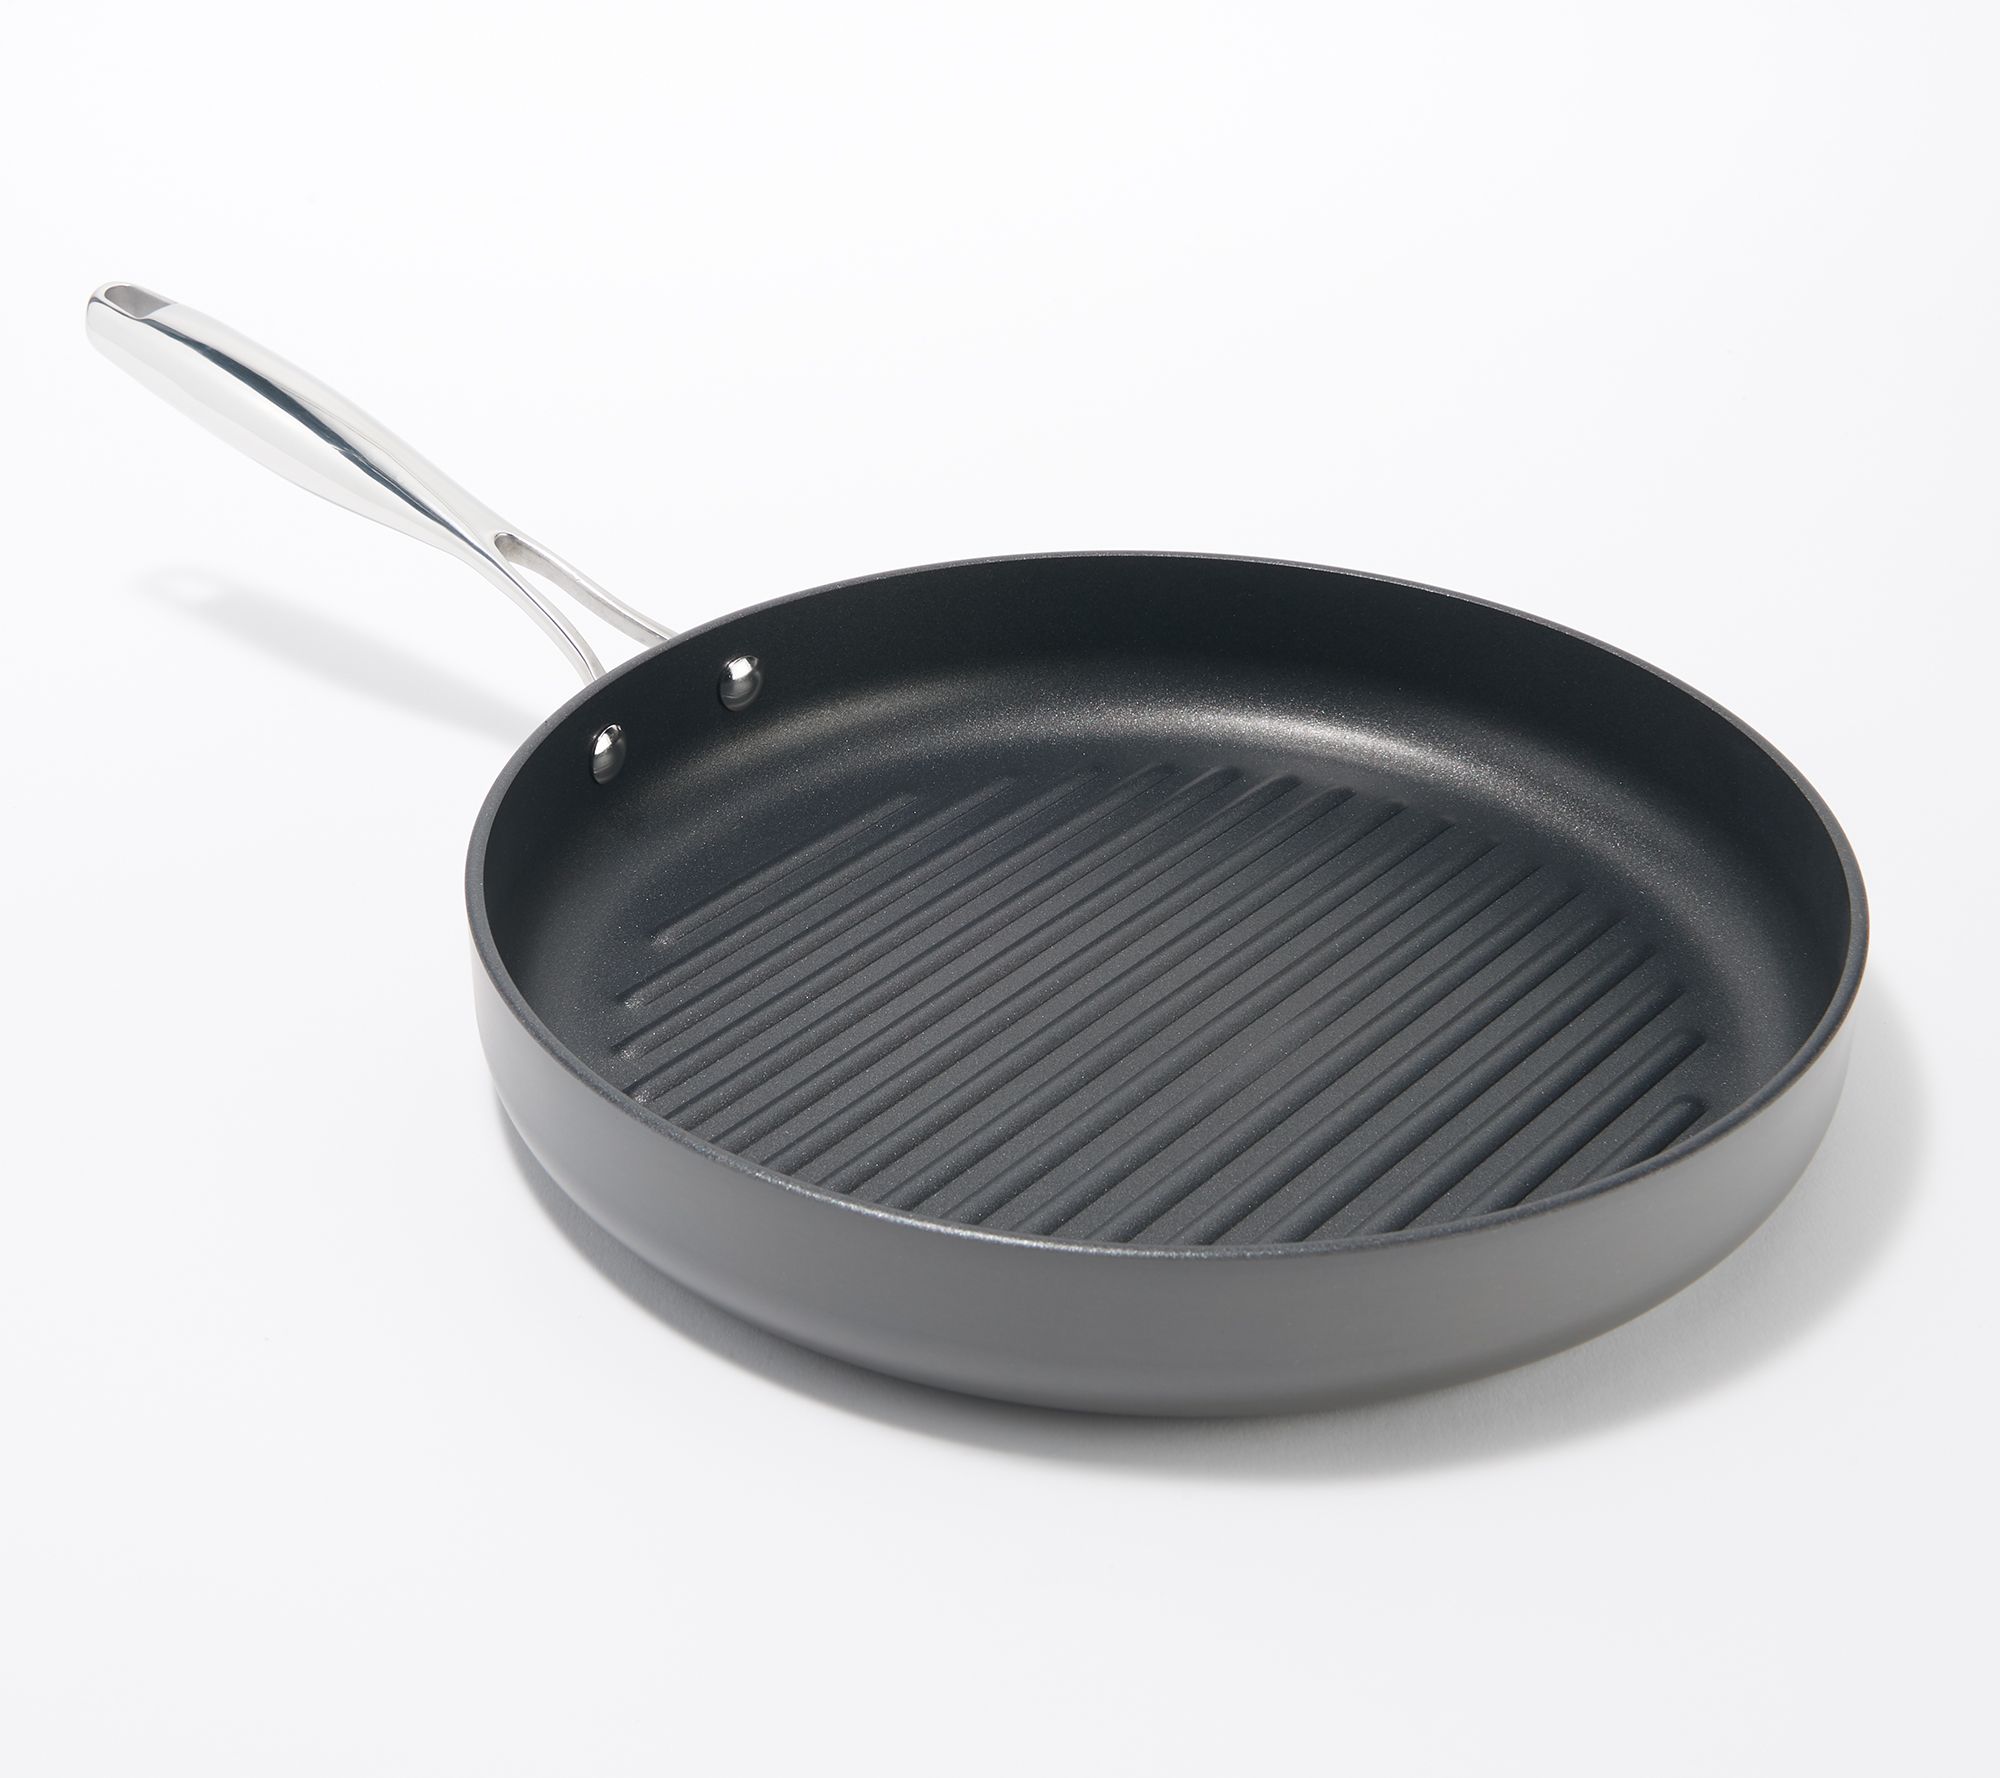 NutriChef Nonstick Stove Top Grill Pan 11 Hard Anodized Nonstick